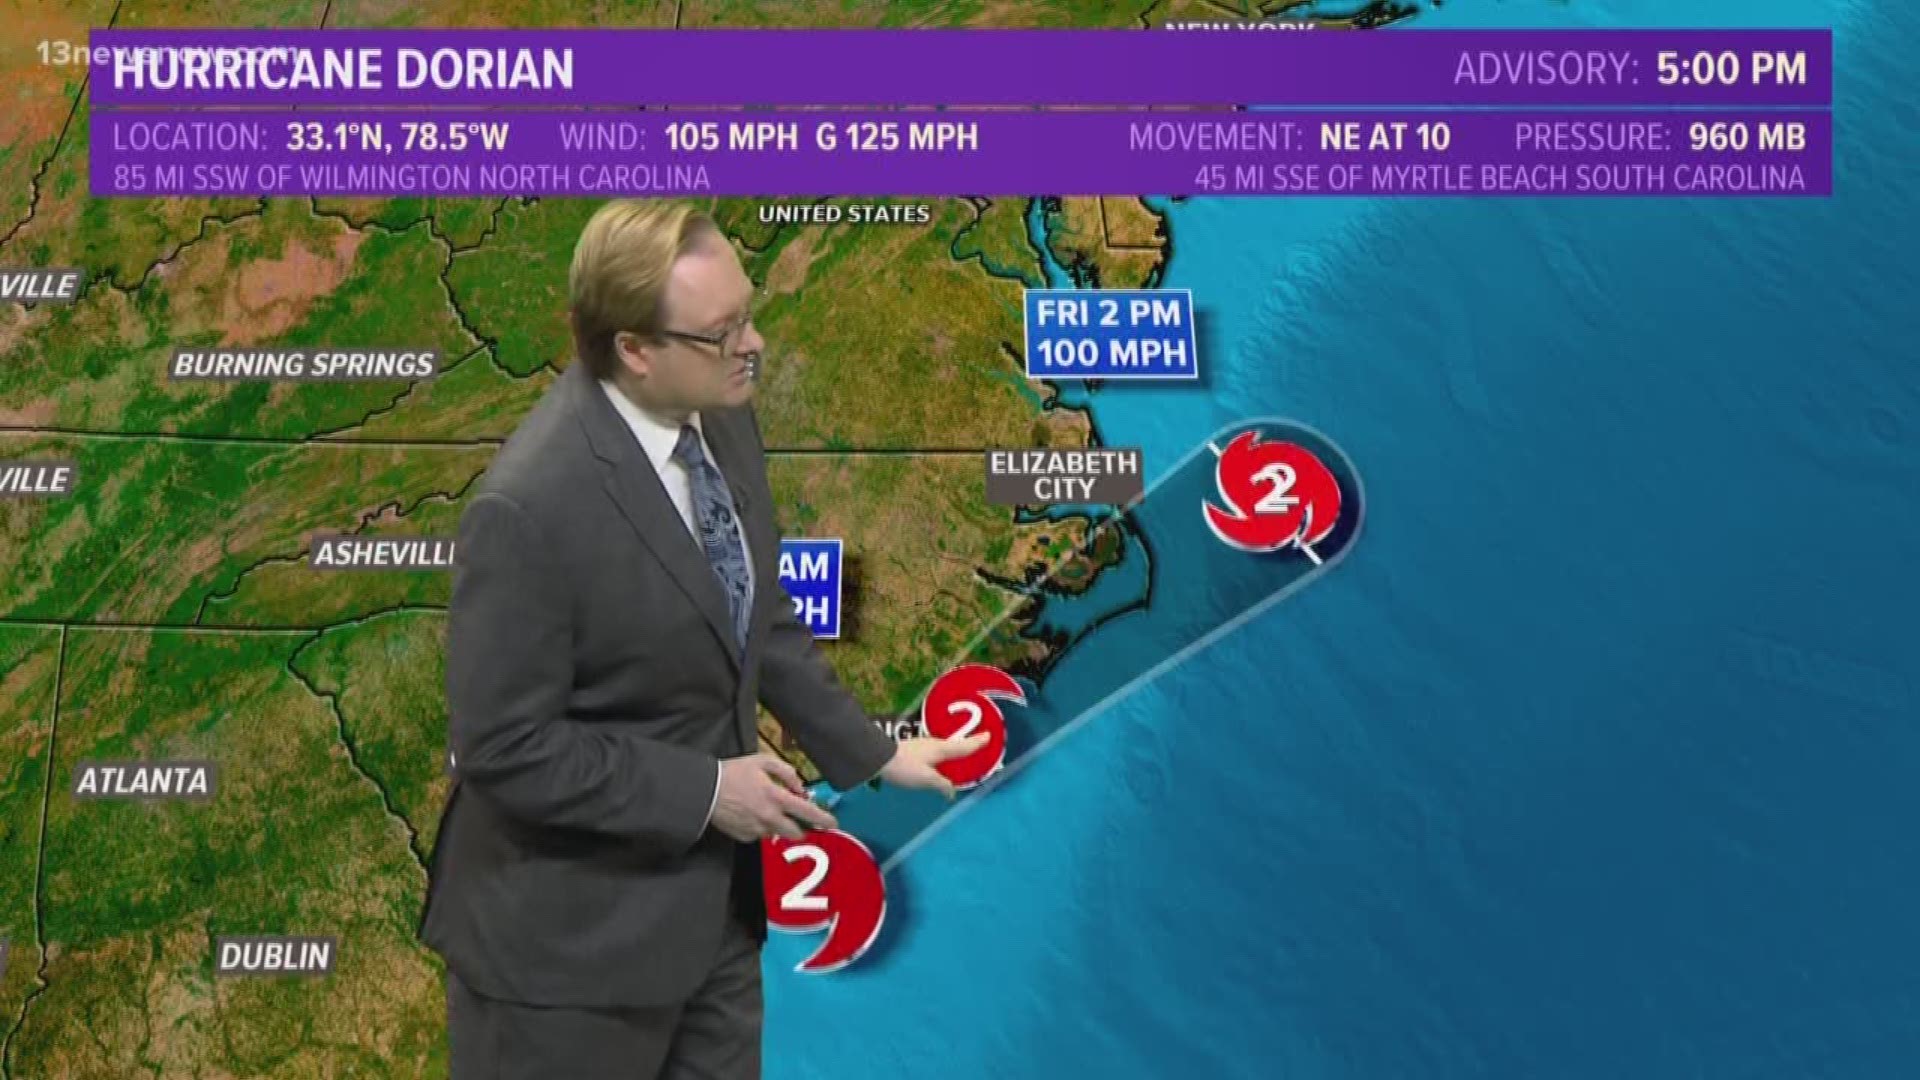 Forecasters say Hurricane Dorian is expected to slowly weaken as it travels near and along the coasts of South and North Carolina. In its 5 p.m. advisory, the National Hurricane Center says Dorian has weakened slightly and remains a Category 2 storm with maximum sustained winds of 105 mph.